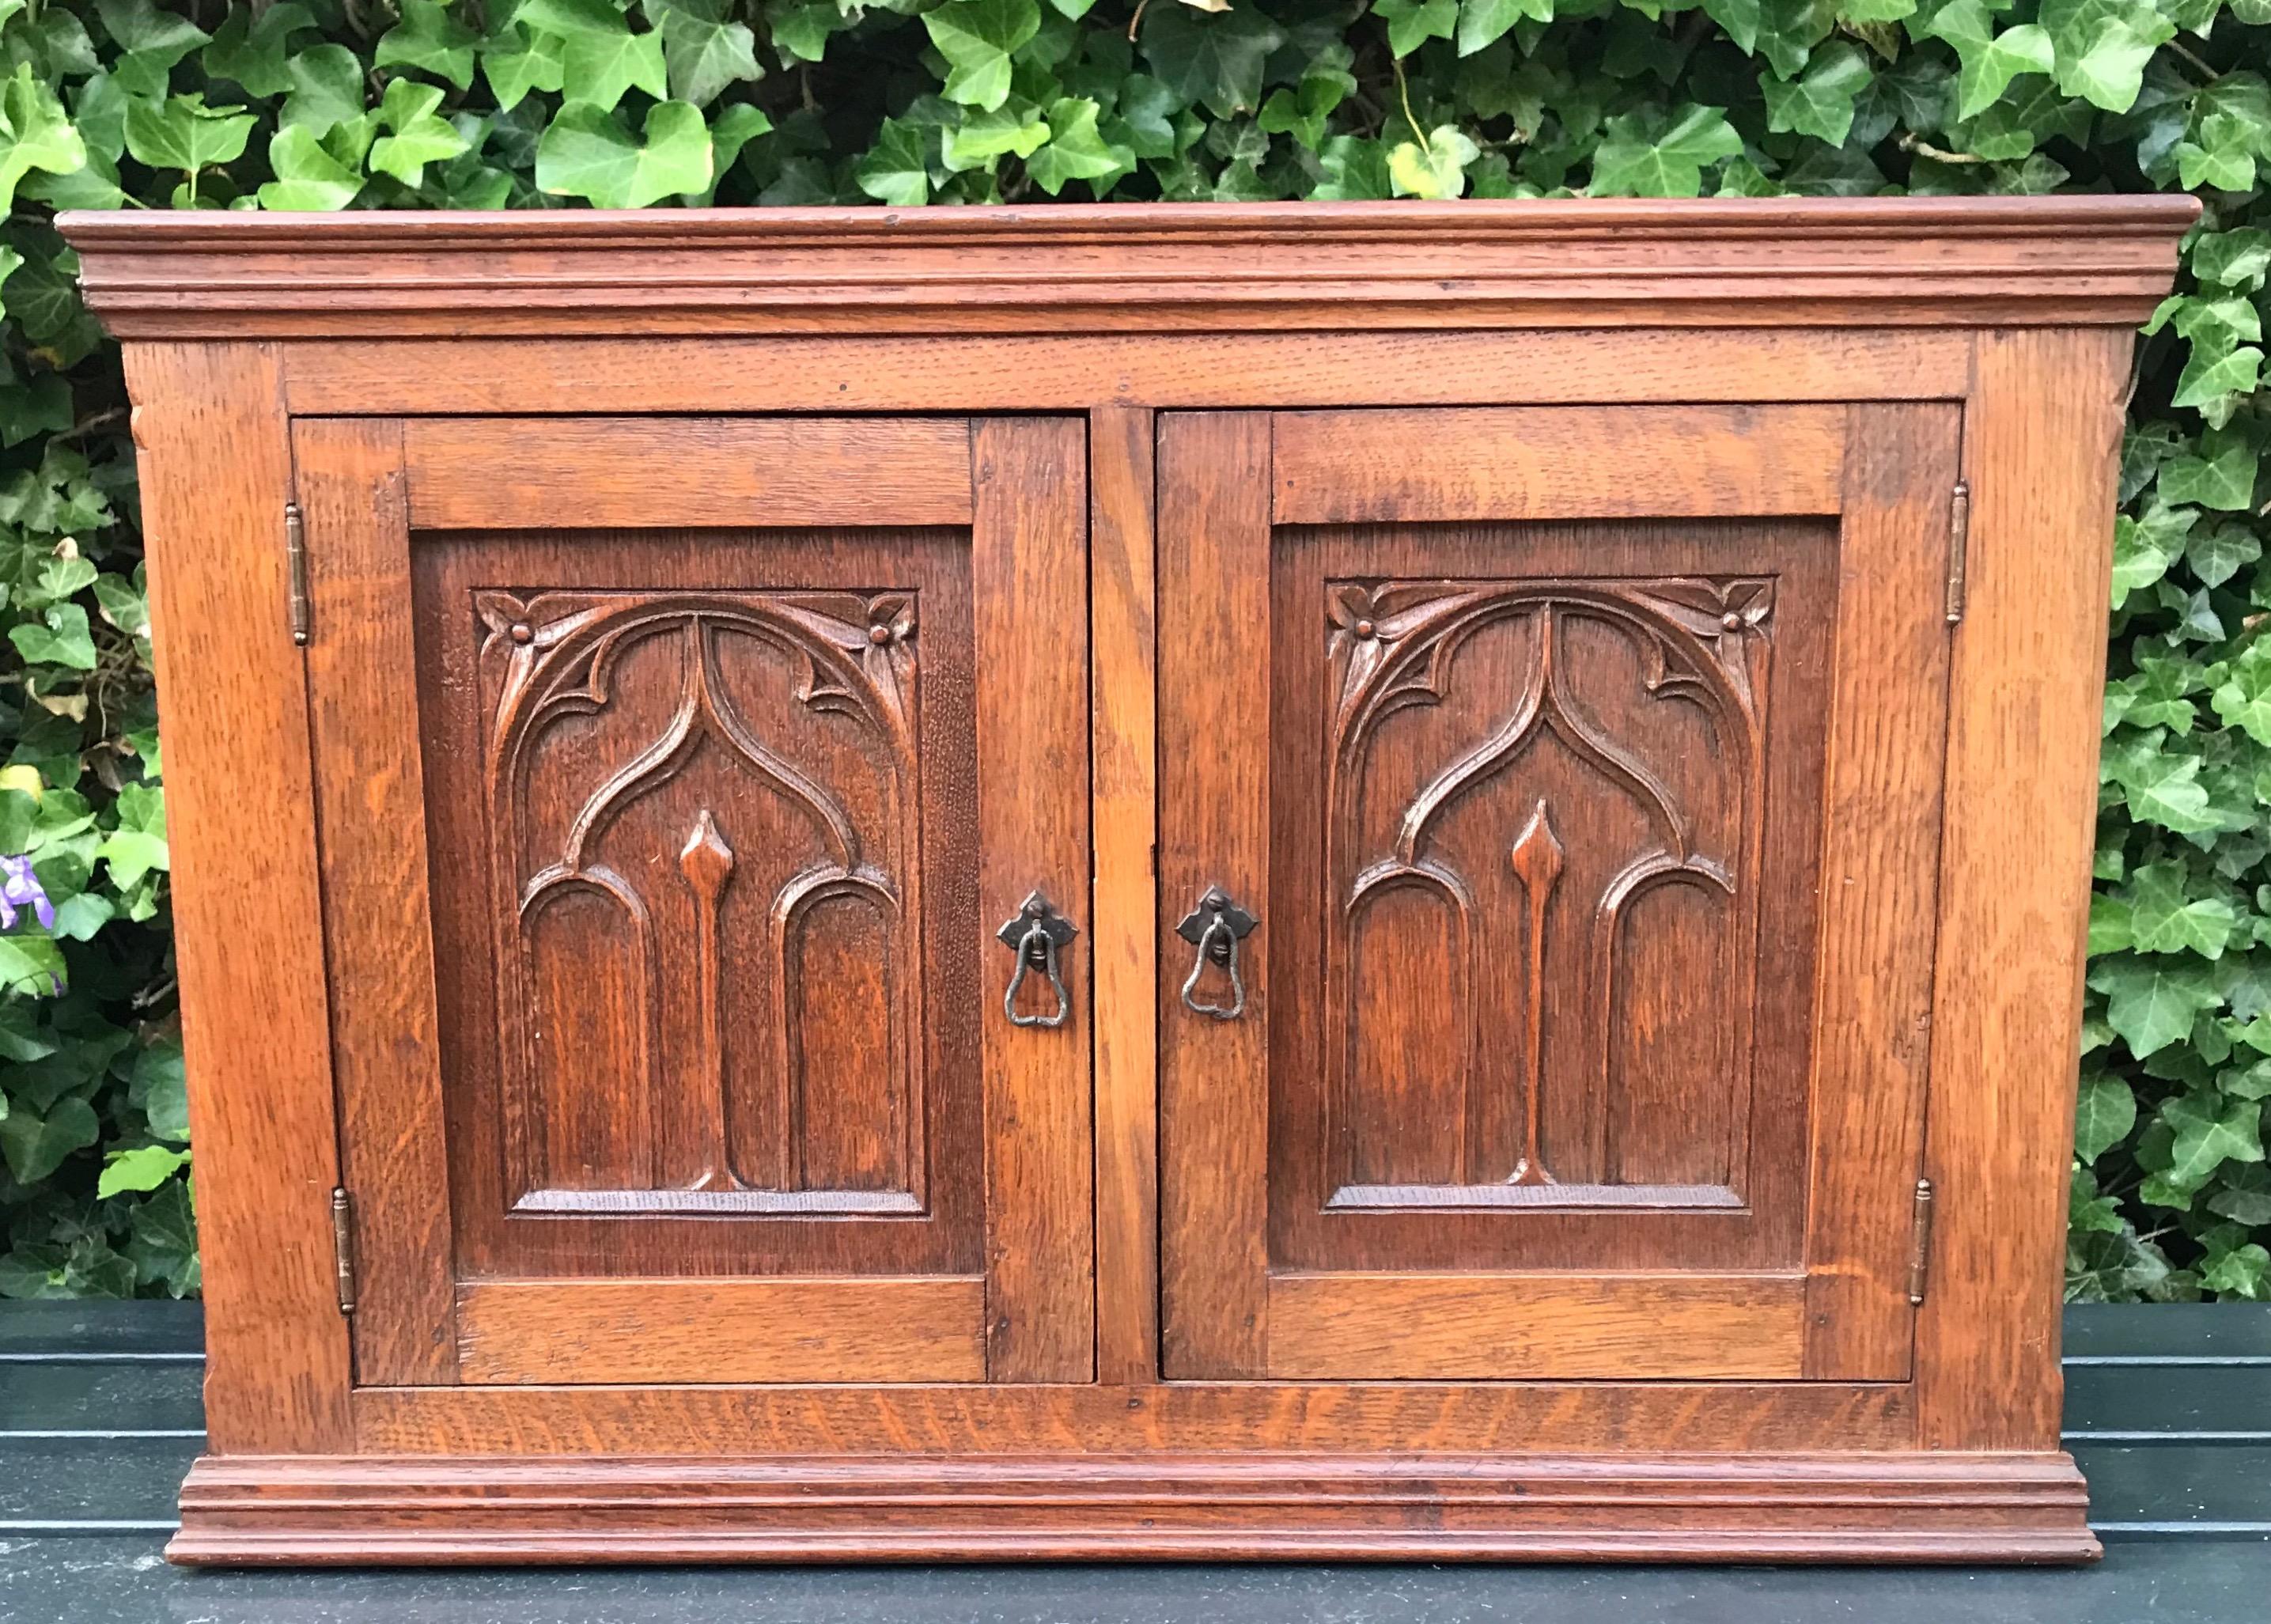 Small size and fine shape Gothic design wall cabinet with wonderful patina.

This early 20th century and well crafted cabinet can be used for all kinds of purposes. The gothic-art design motifs in the door panels are all hand-carved and an absolute